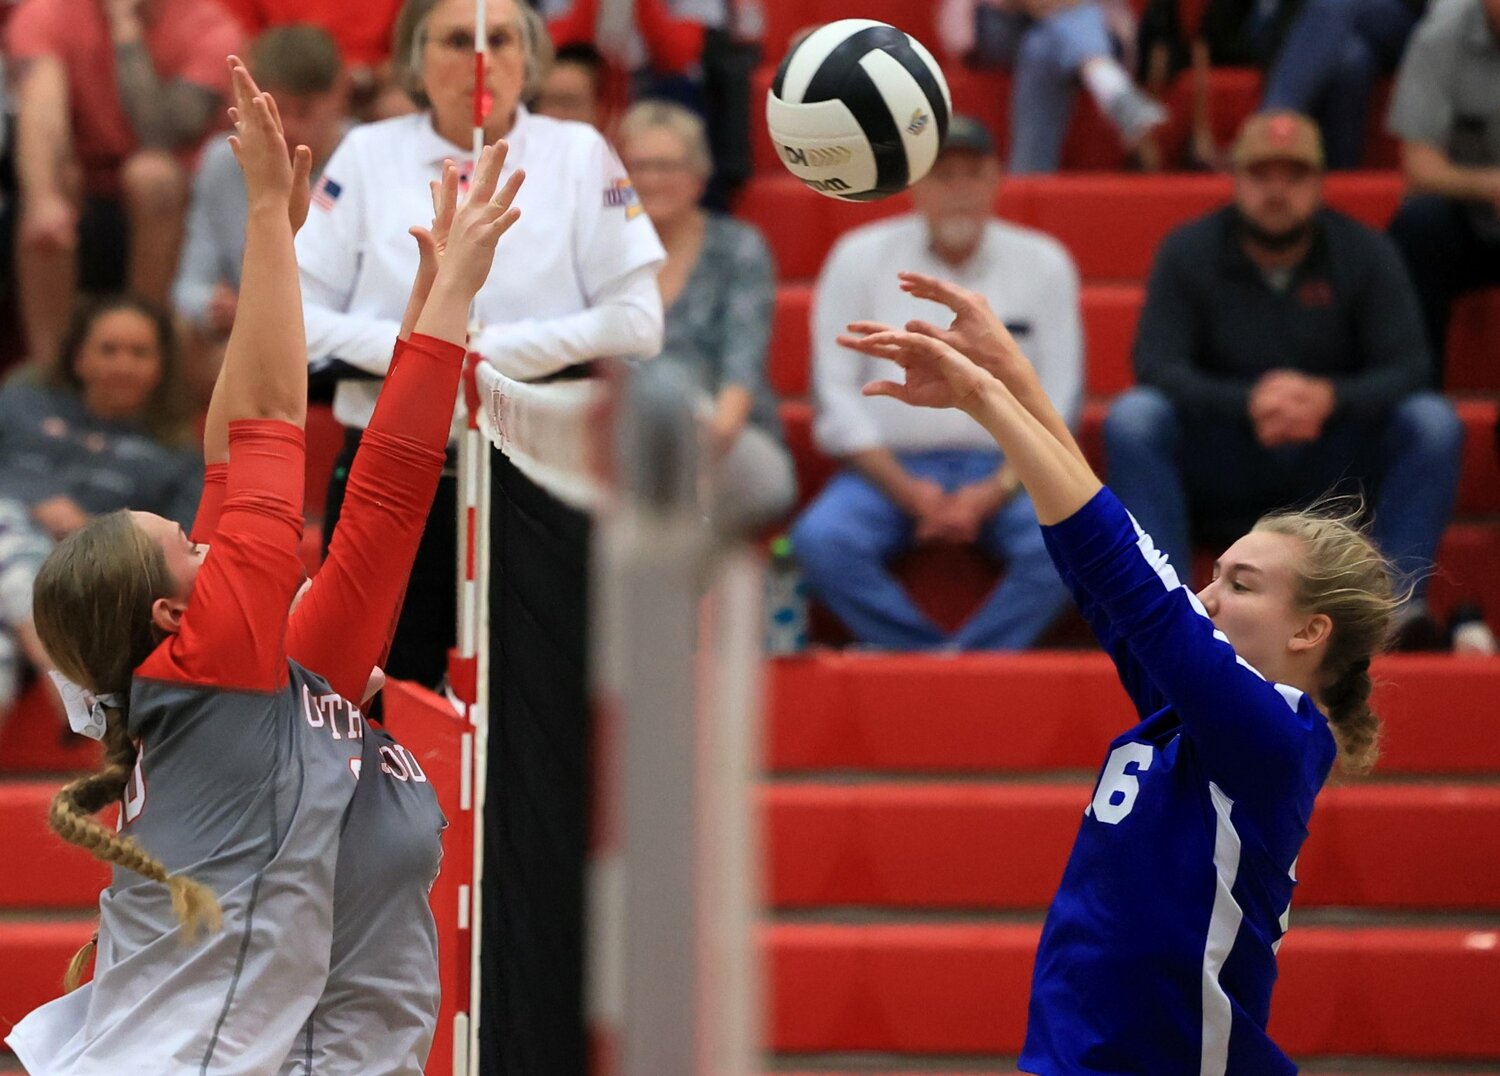 Southmont saw its season come to an end with a three set loss to South Putnam in the sectional opener on Thursday night.